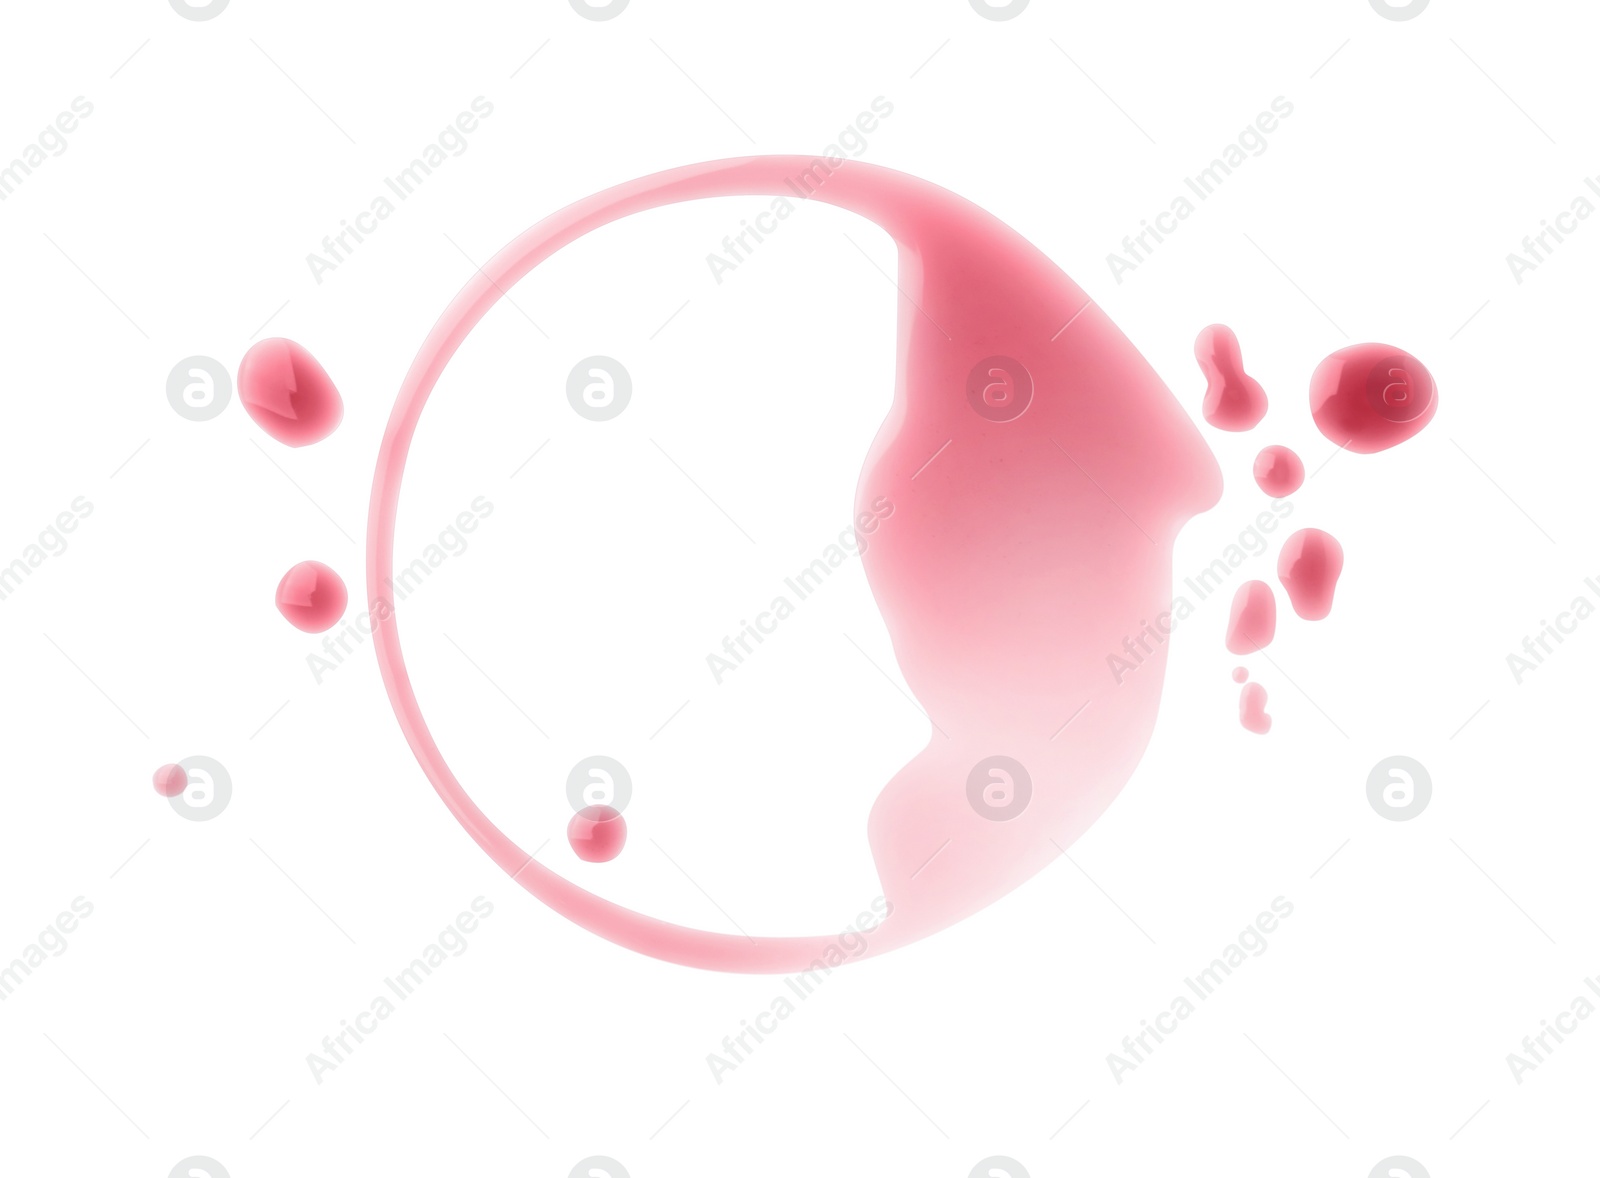 Photo of Red wine ring and drops on white background, top view